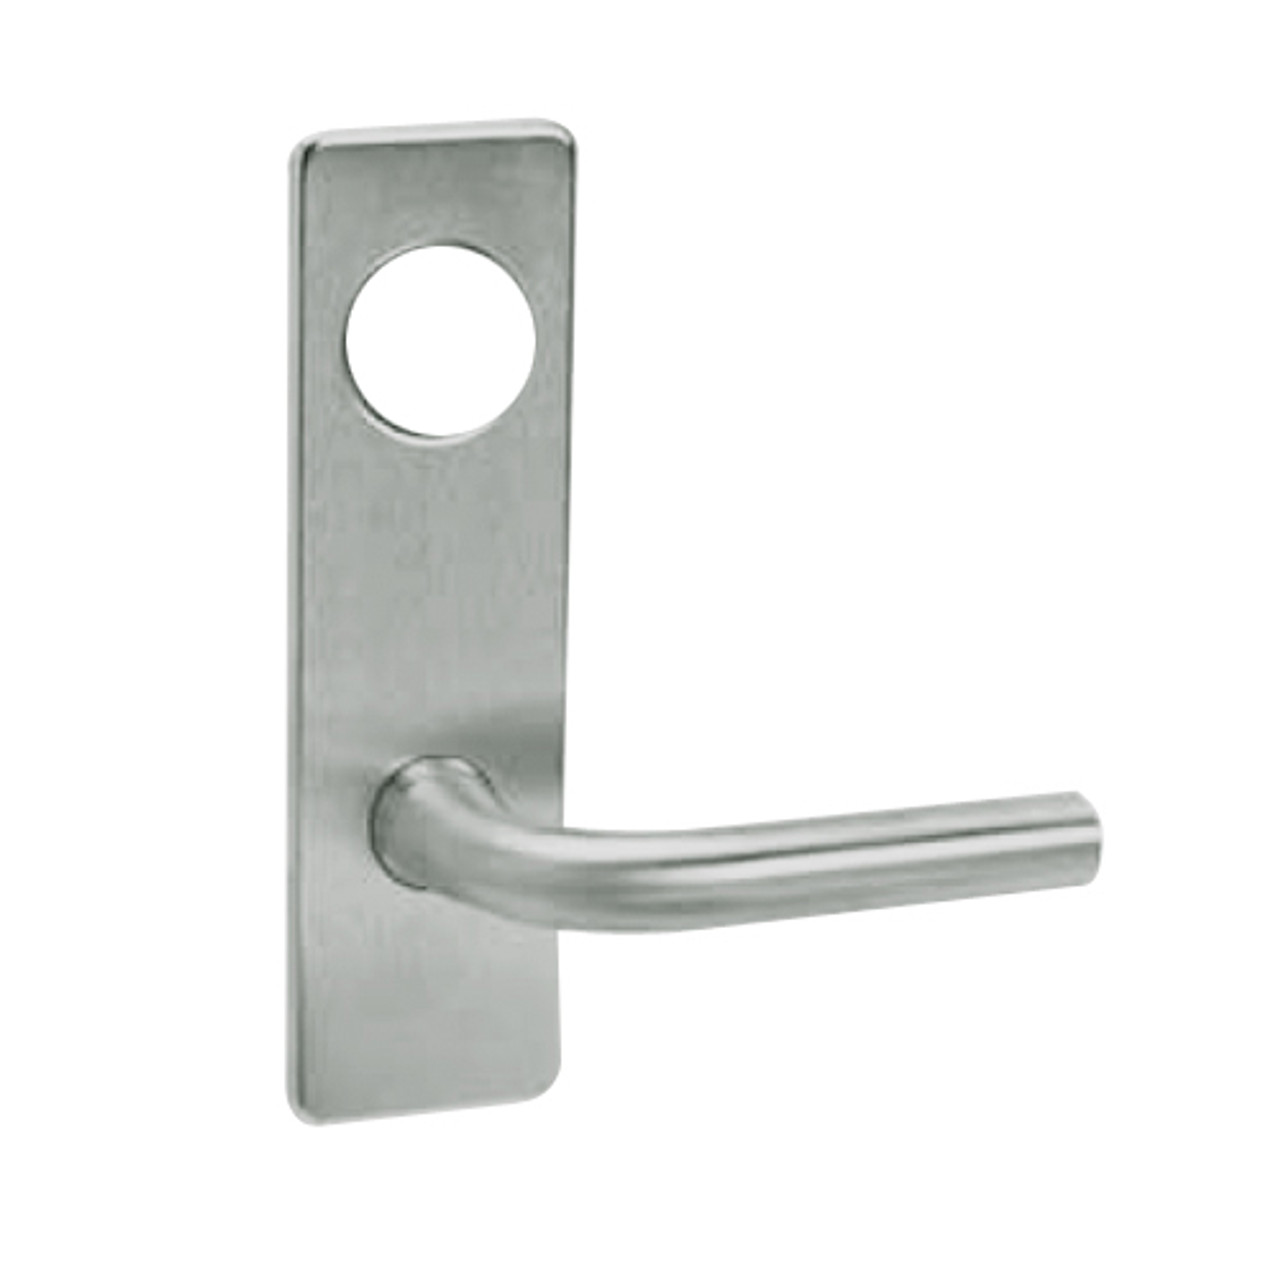 ML2055-RSM-619-CL6 Corbin Russwin ML2000 Series IC 6-Pin Less Core Mortise Classroom Locksets with Regis Lever in Satin Nickel